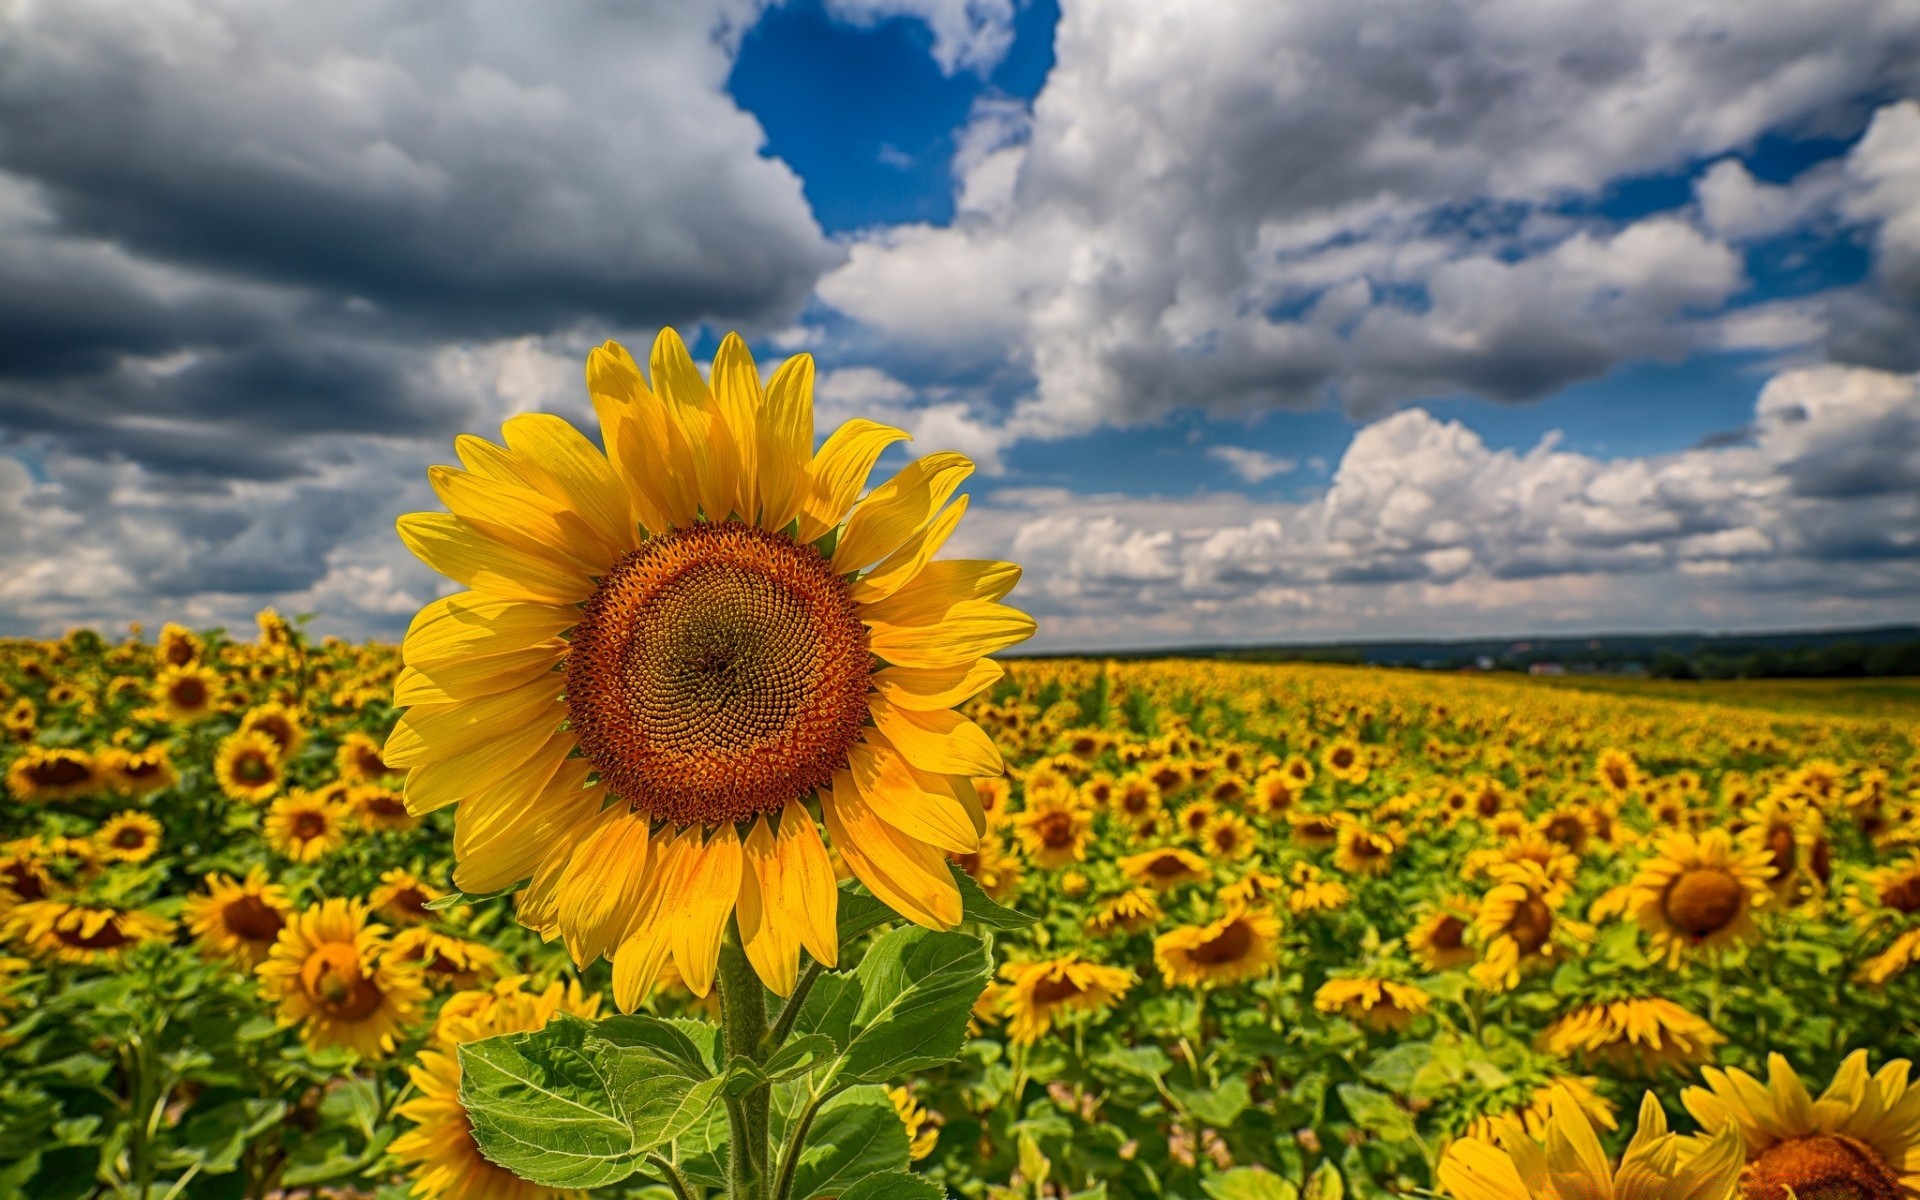 landscapes sunflower summer nature flower field flora rural bright sun growth fair weather hayfield agriculture vibrant sunny sky outdoors leaf season